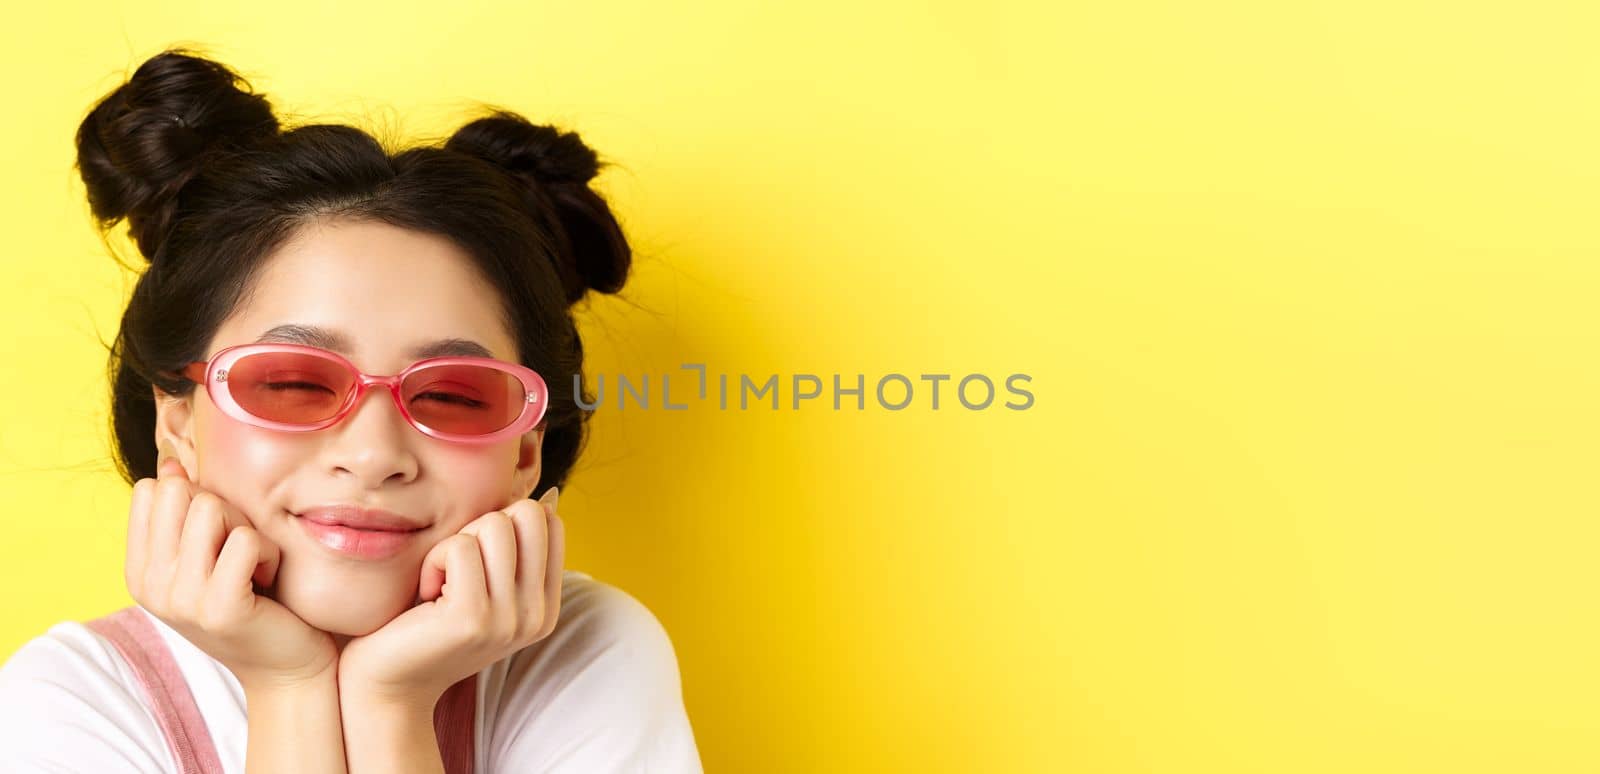 Summer fashion concept. Dreamy asian girl with romantic face expression, daydreaming or imaging something beautiful with closed eyes and happy smile, wearing sunglasses.